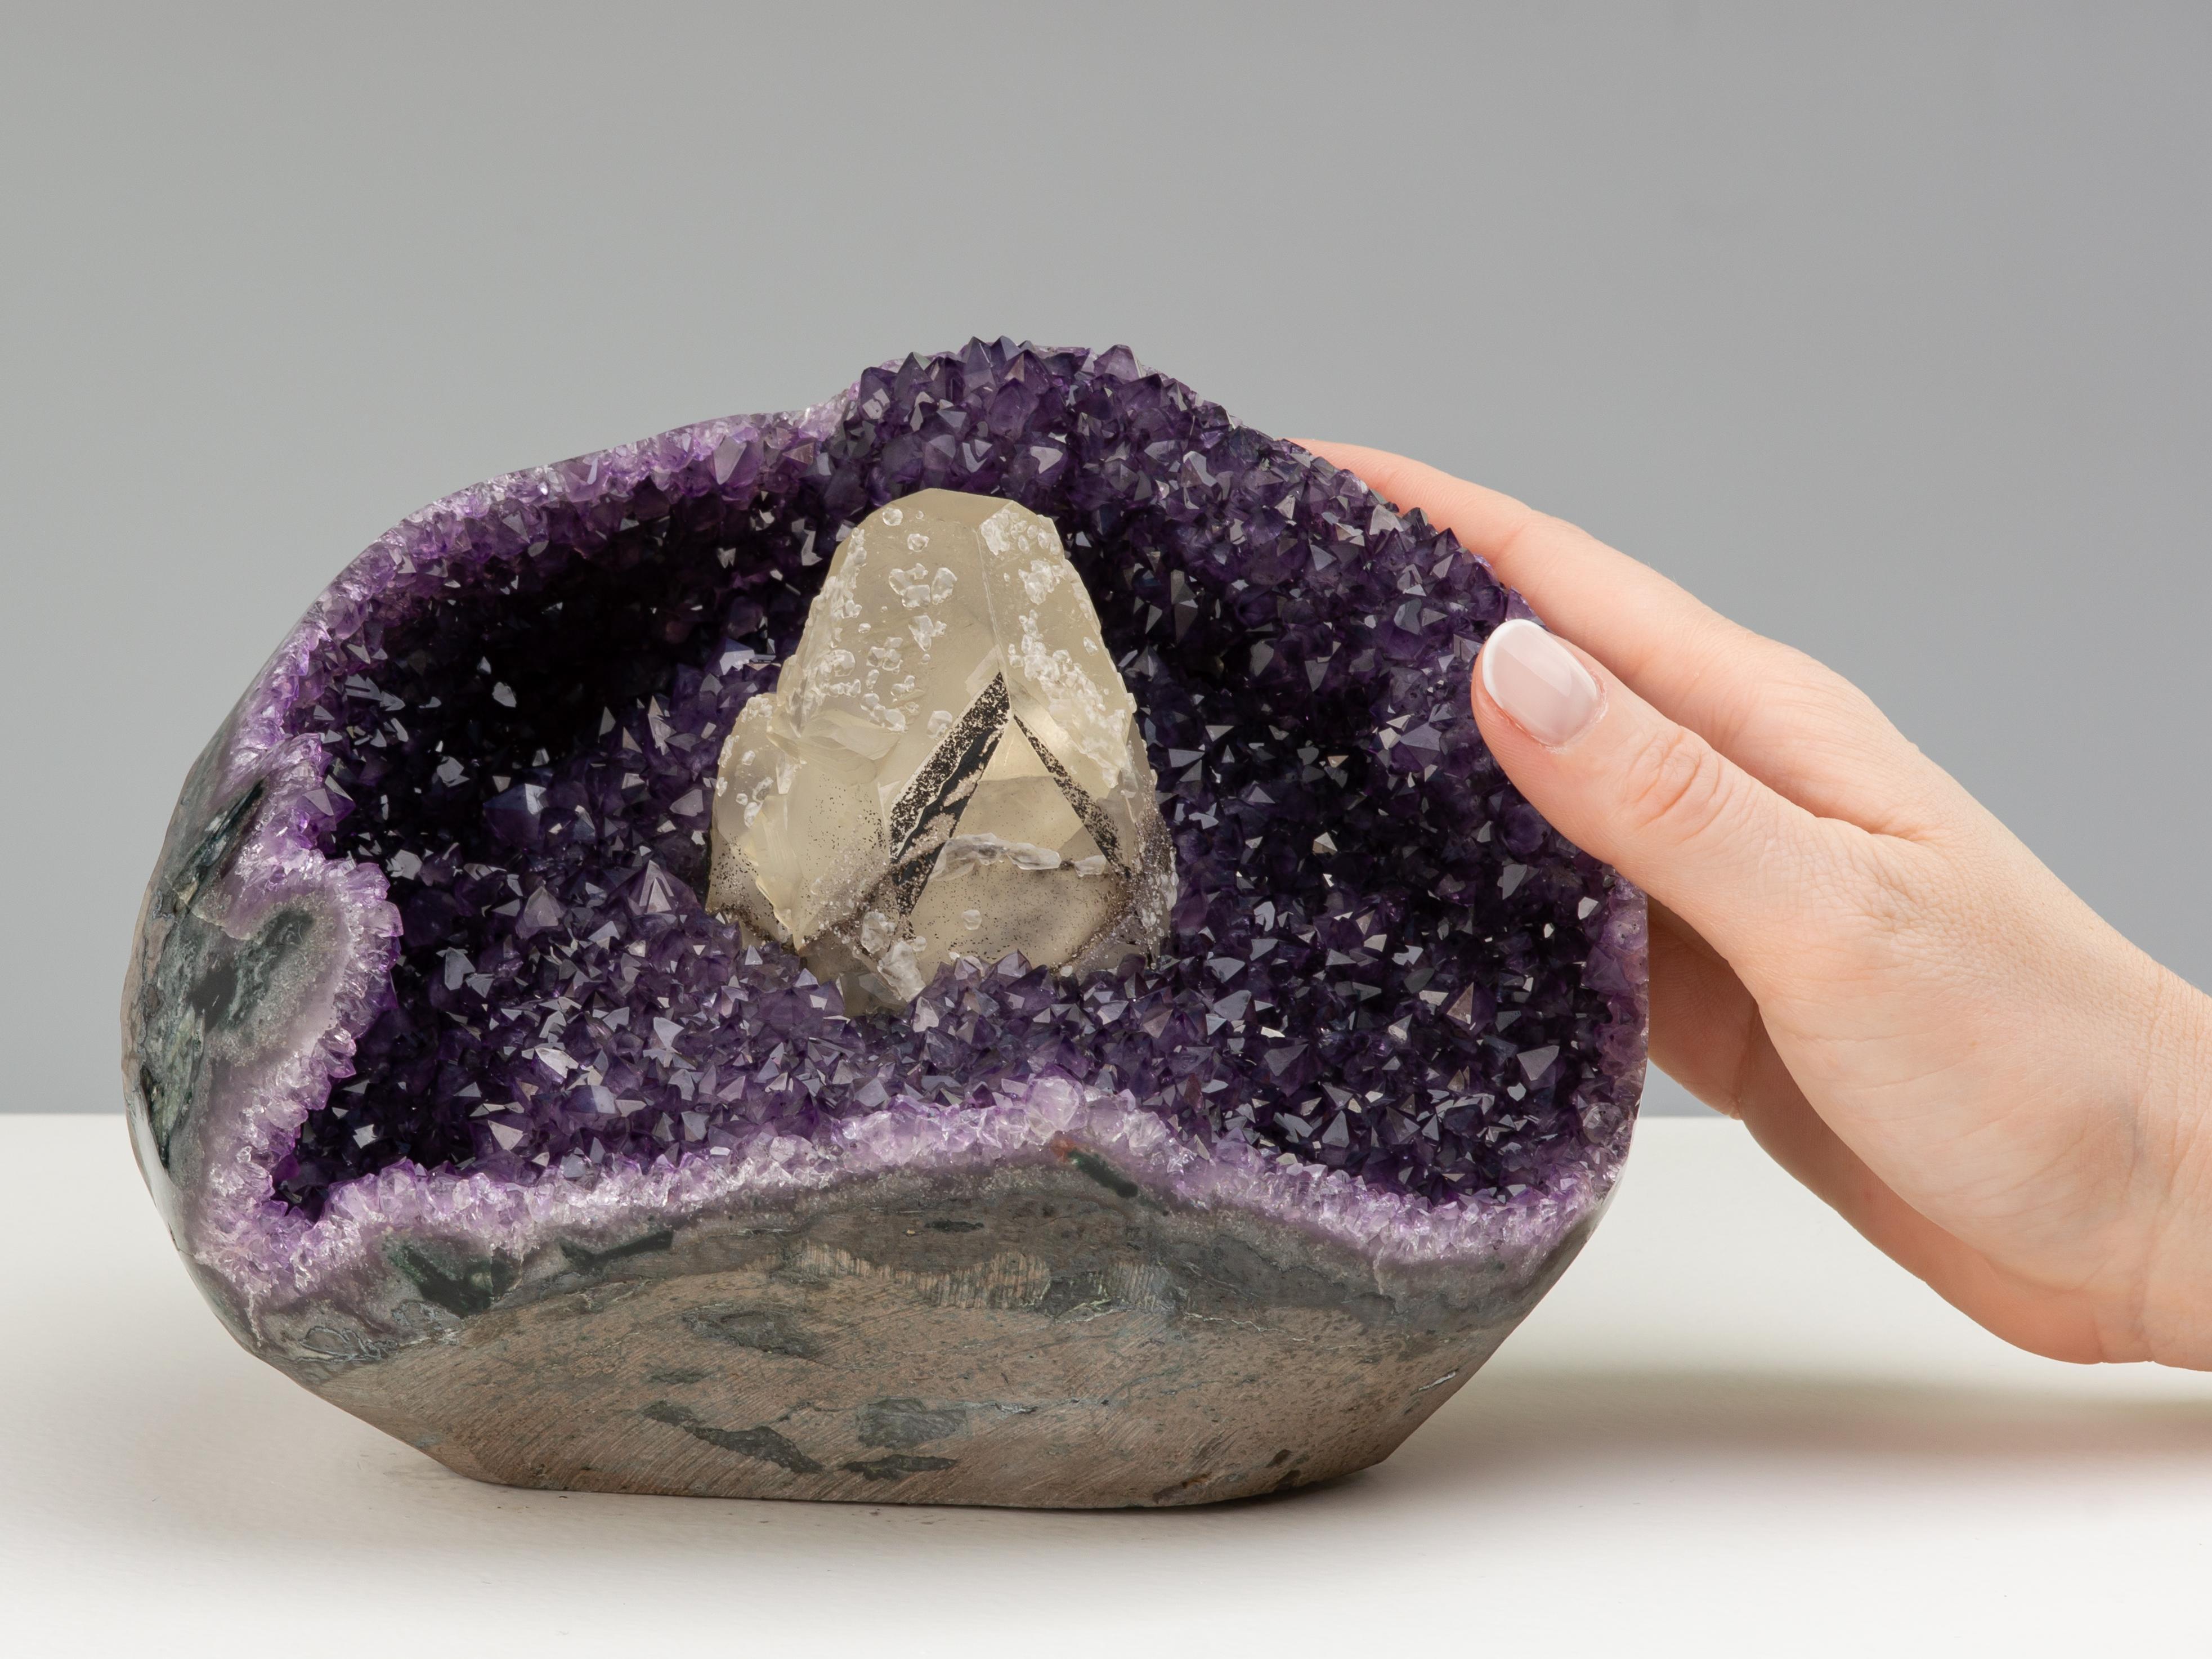 A stunning amethyst formation formed of a three quarter geode with cut window, revealing deep purple amethyst crystals, with a beautiful central calcite coated in black goethite and and white druzy quartz.

The piece is a wonderful example of the